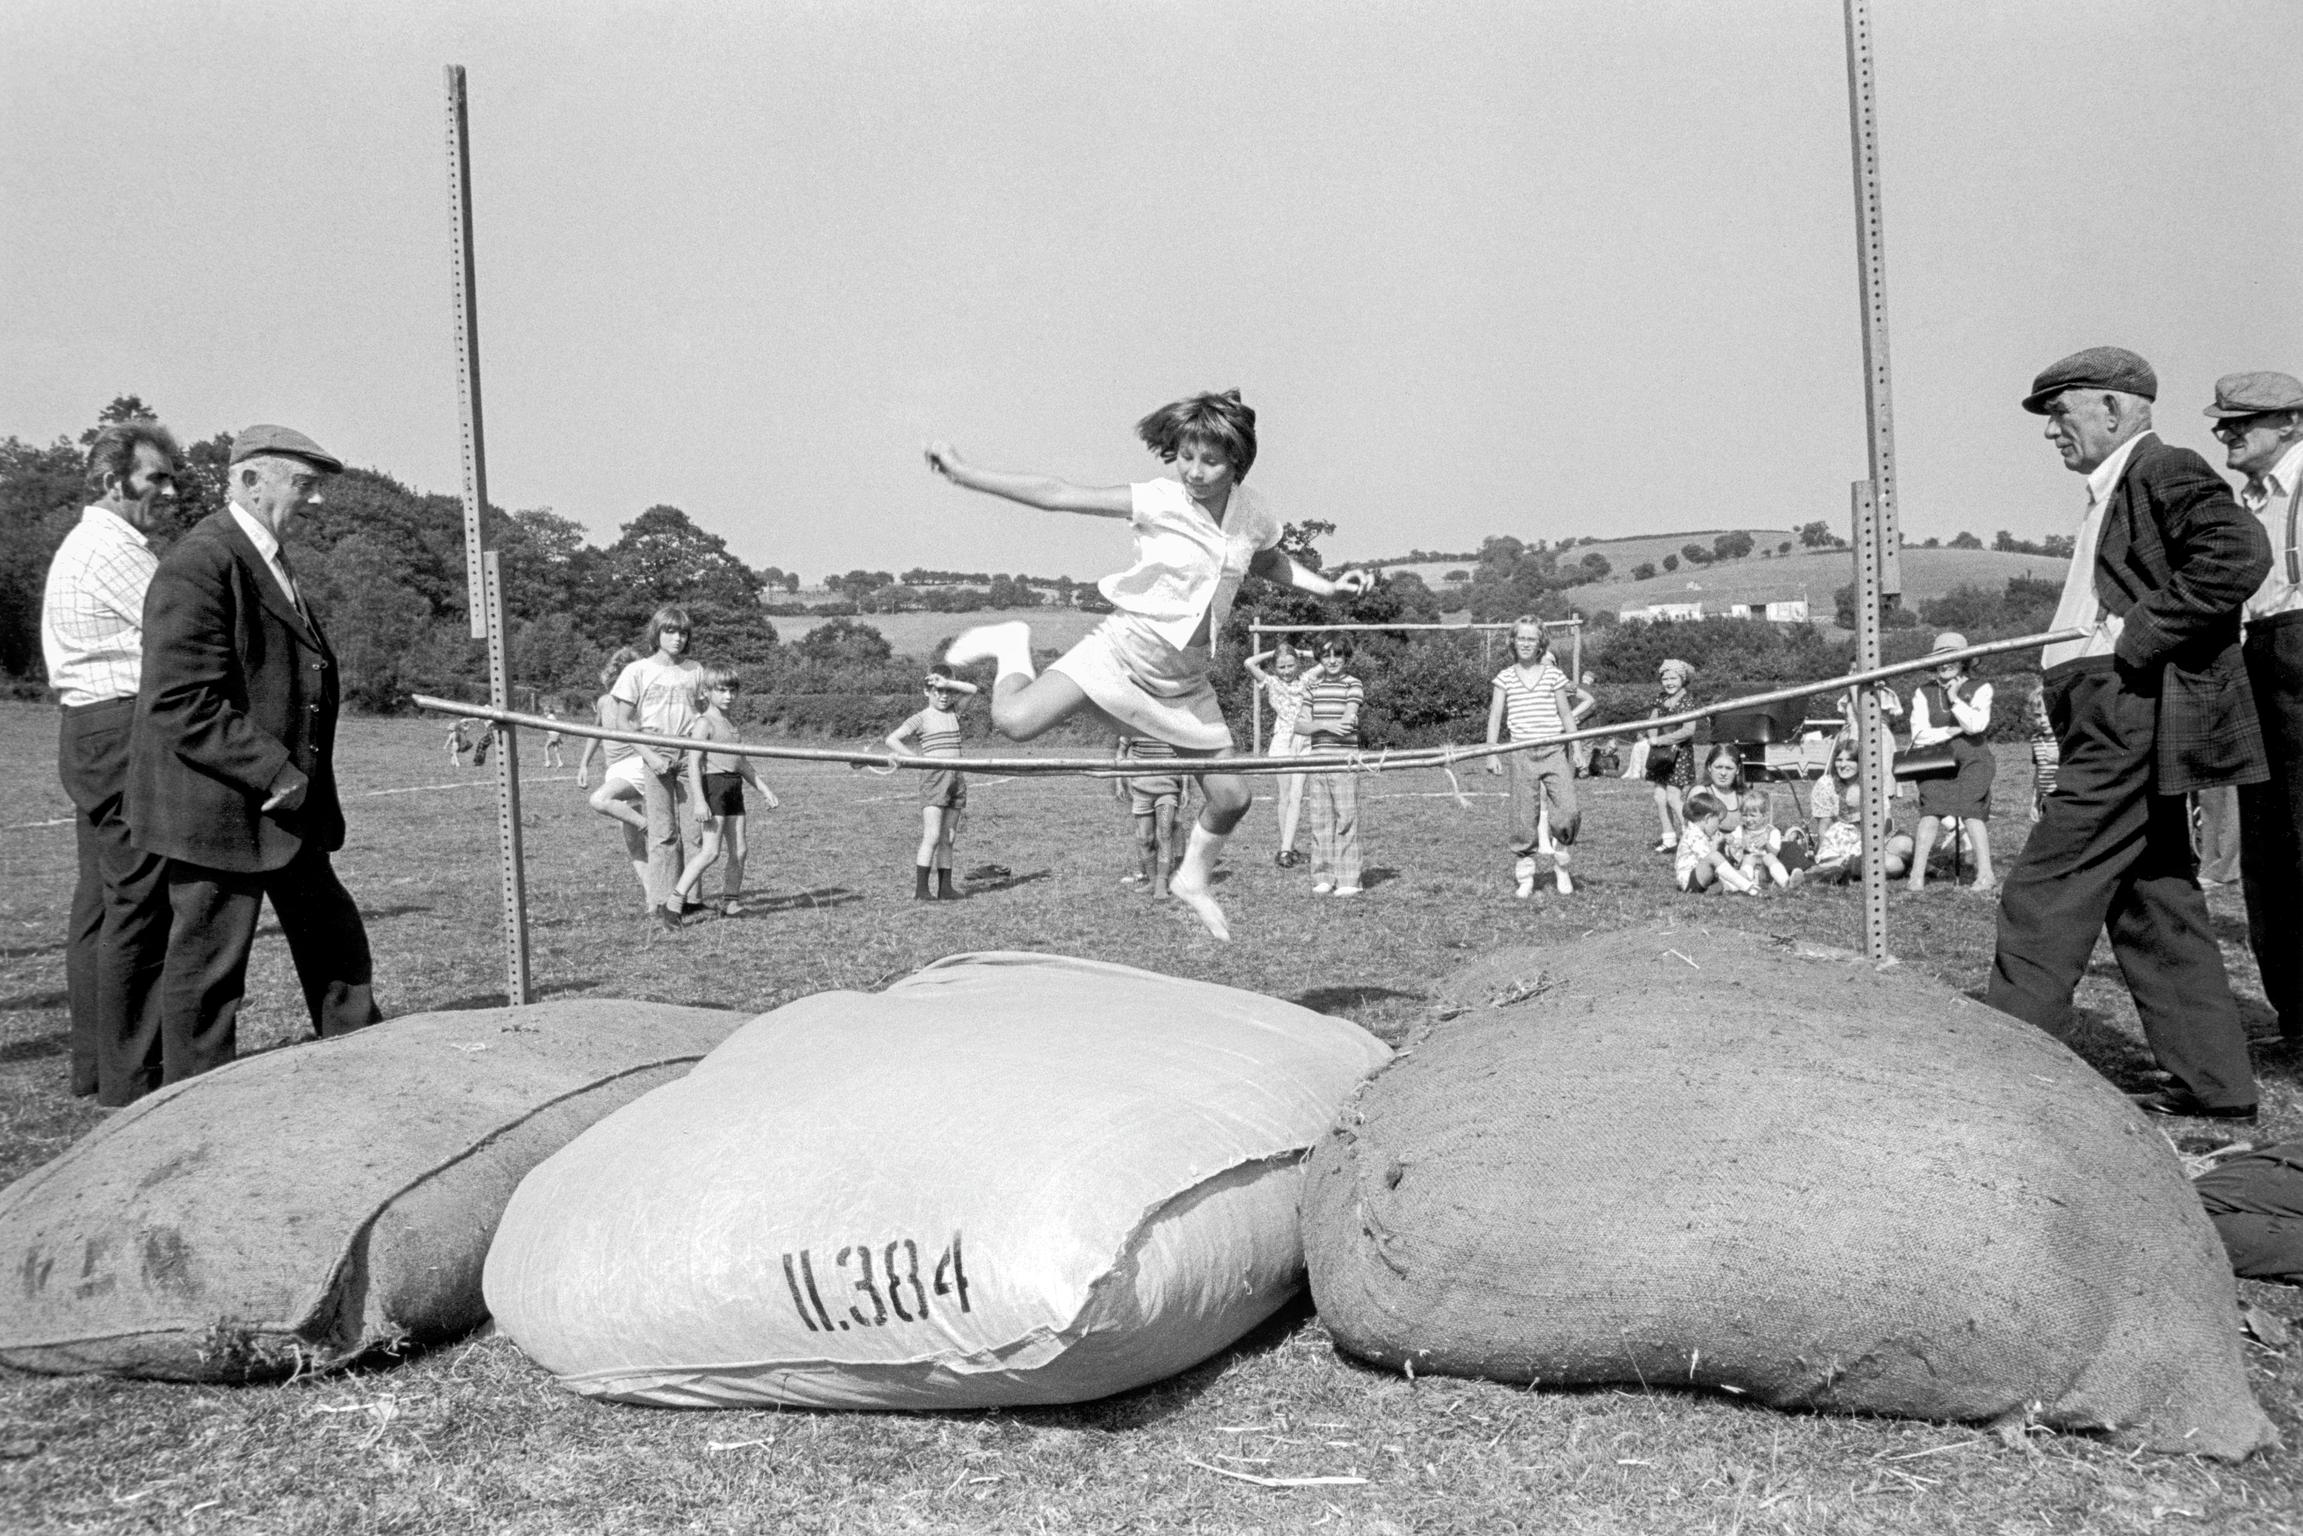 The high jump at the children's sports day at Upper Chapel in Mid Wales